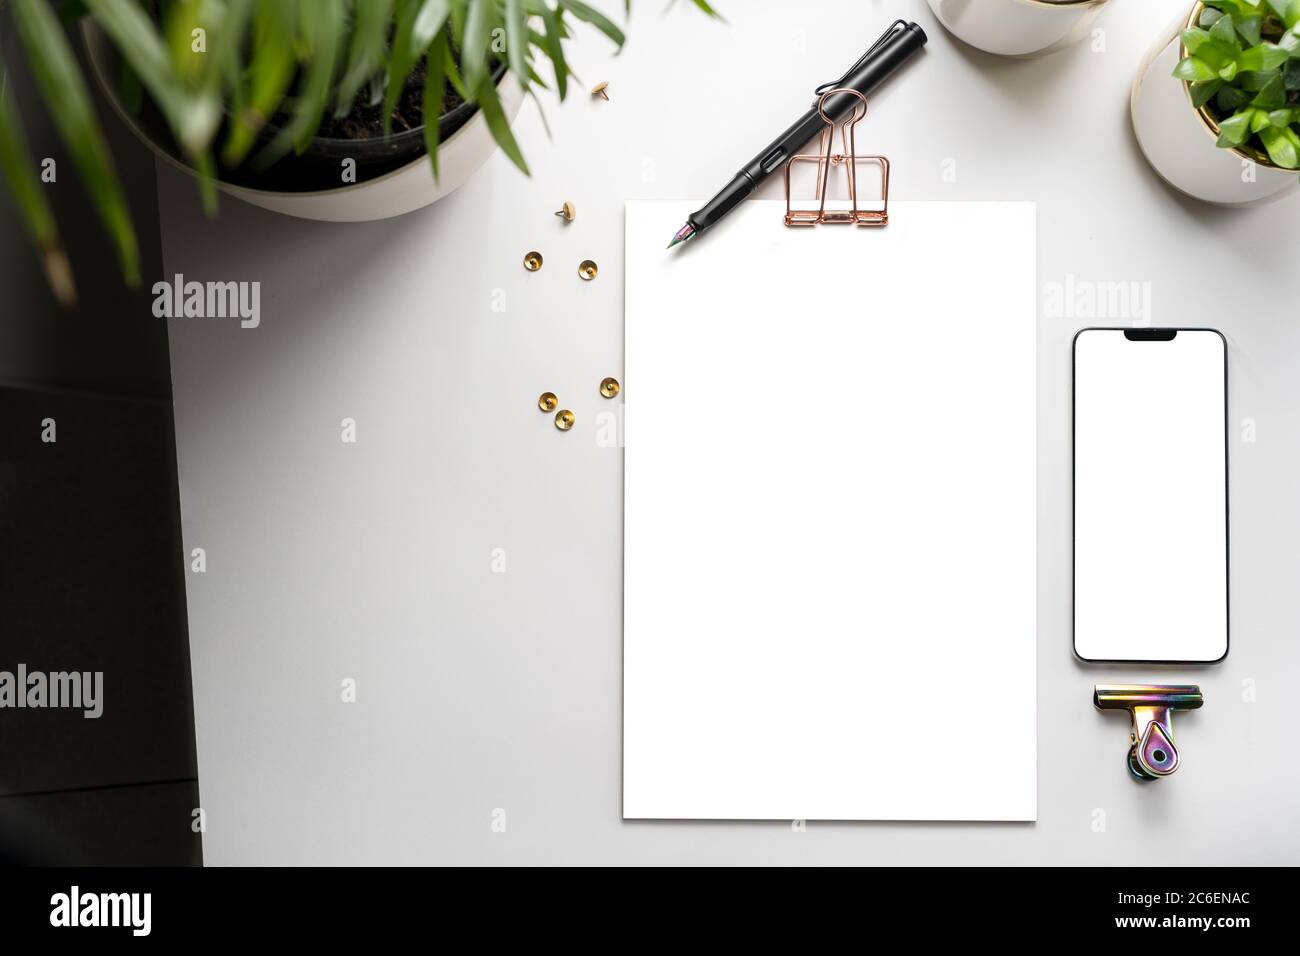 Top view clipboard and mobile template and green plants on the desk. branding mockup with workspace accessories Stock Photo